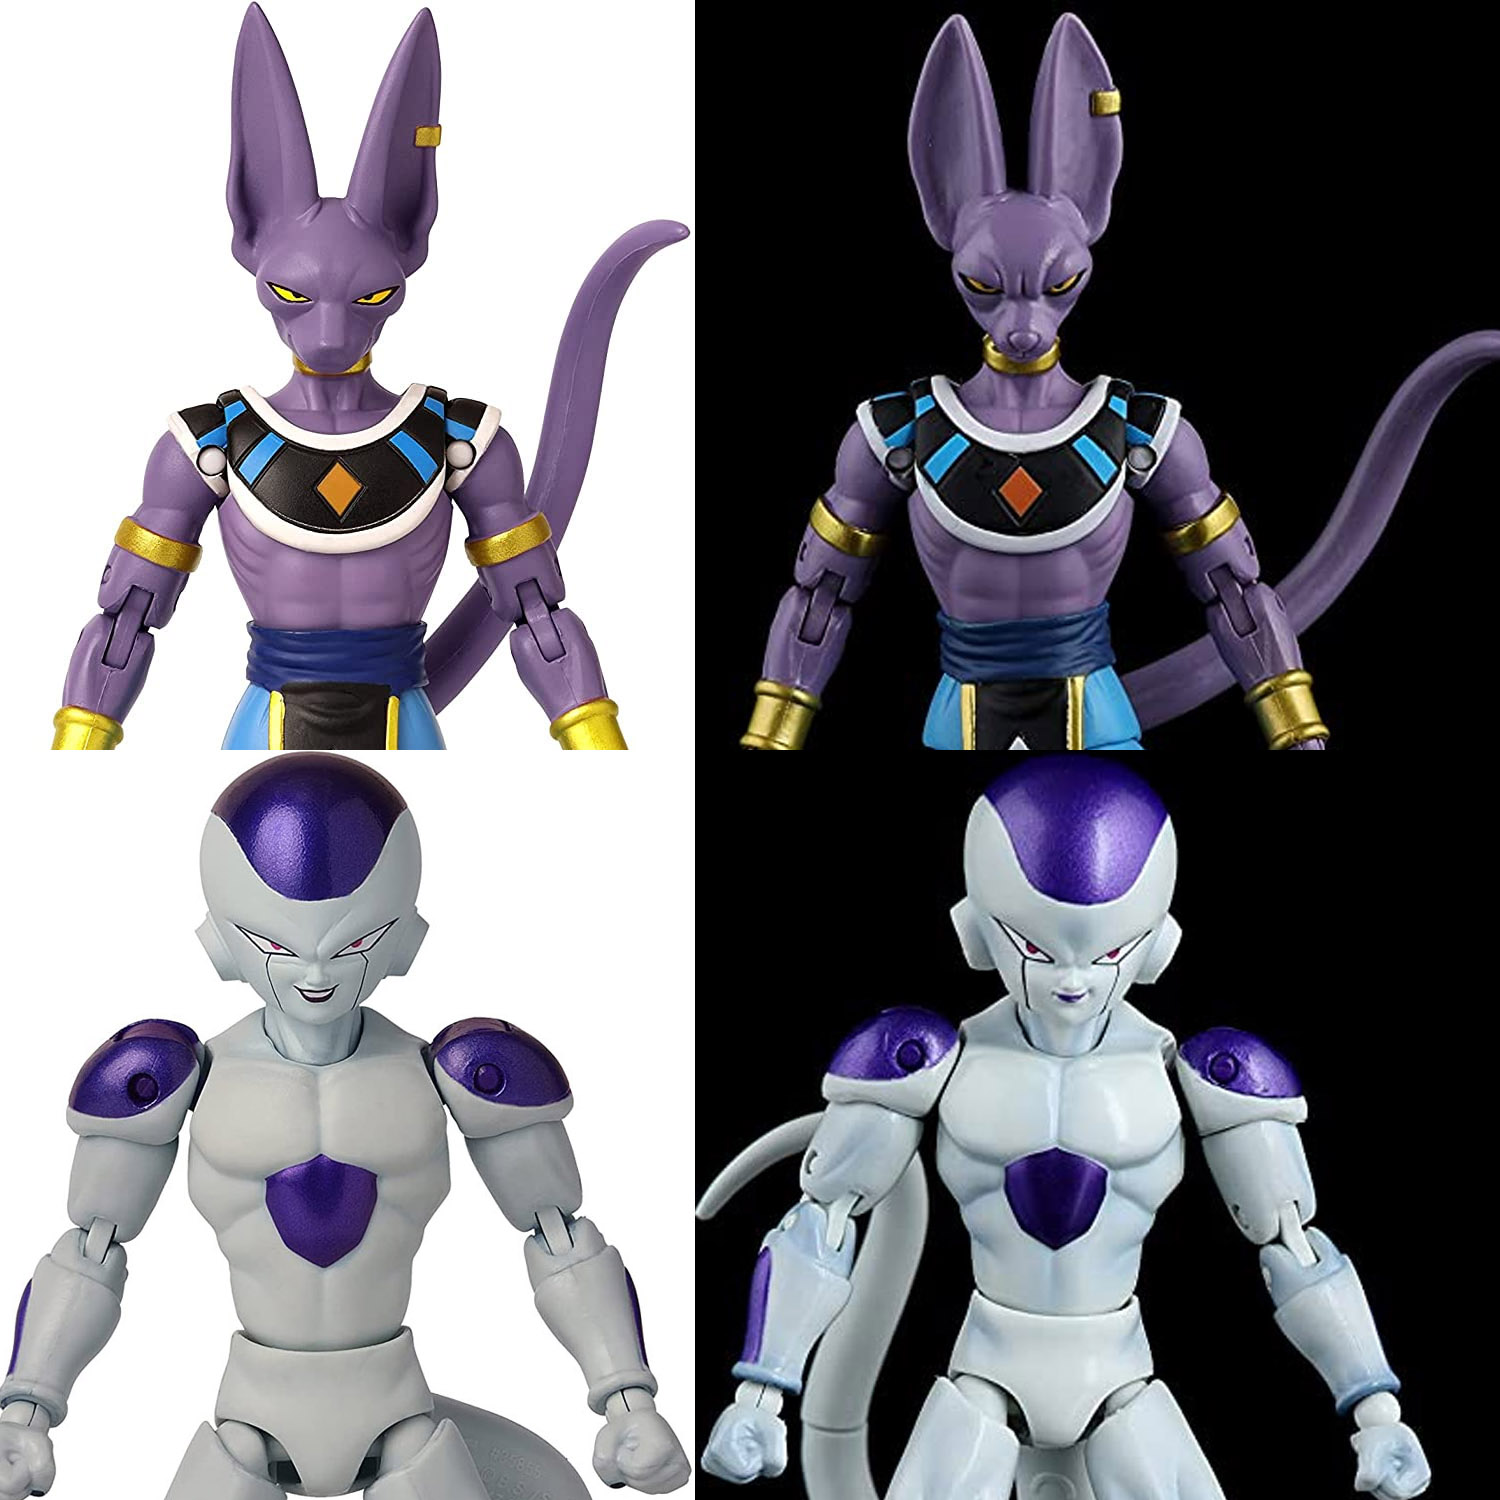 DragonBall Figures on X: New Dragon Stars Sept 2022 available for